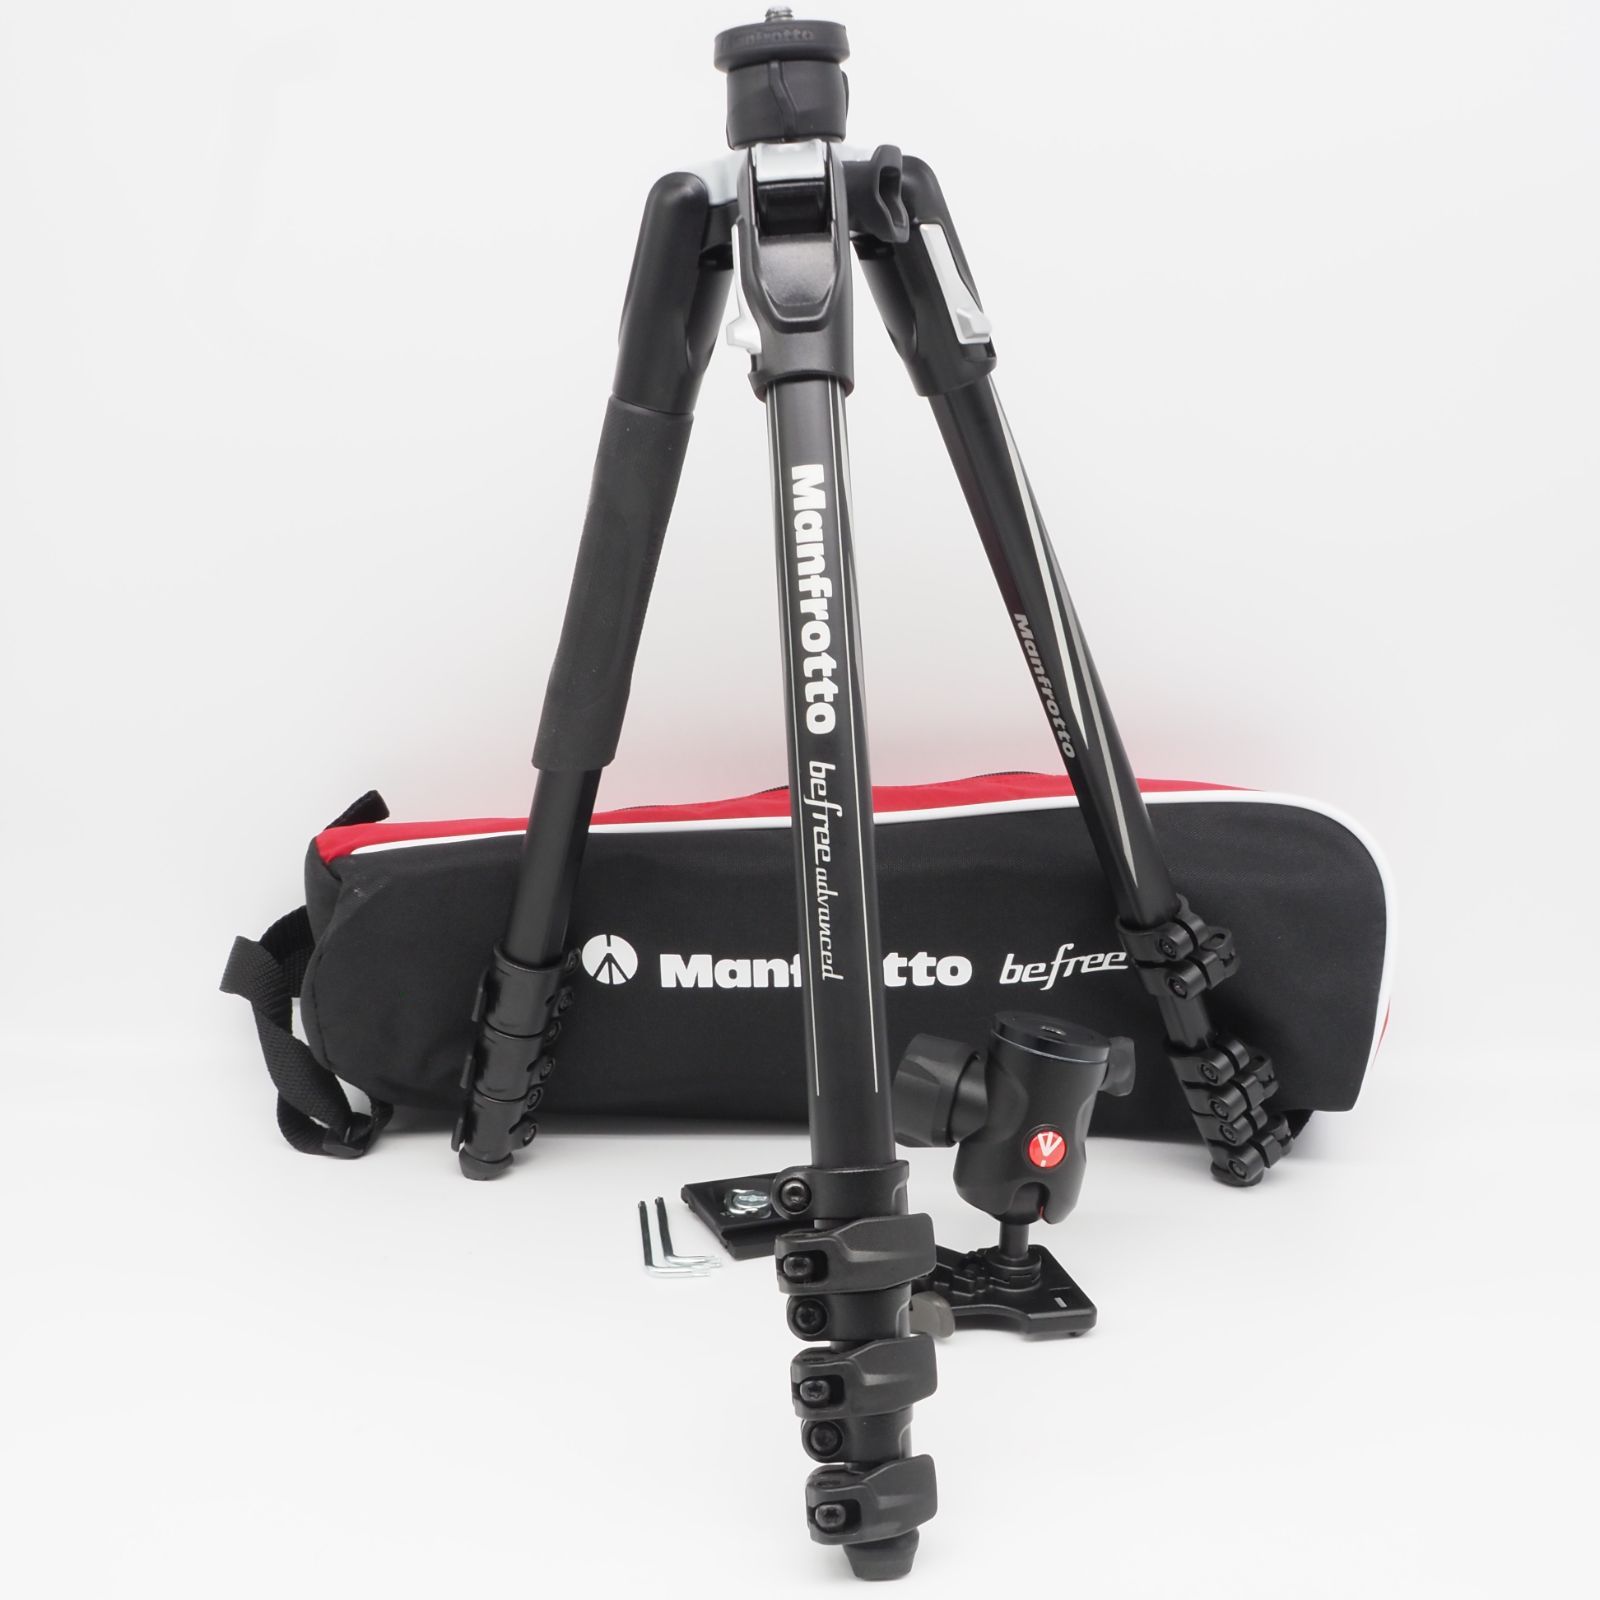 Manfrotto コンパクト三脚 Befree アルミ 4段 ボール雲台キット MKBFRA4-BH